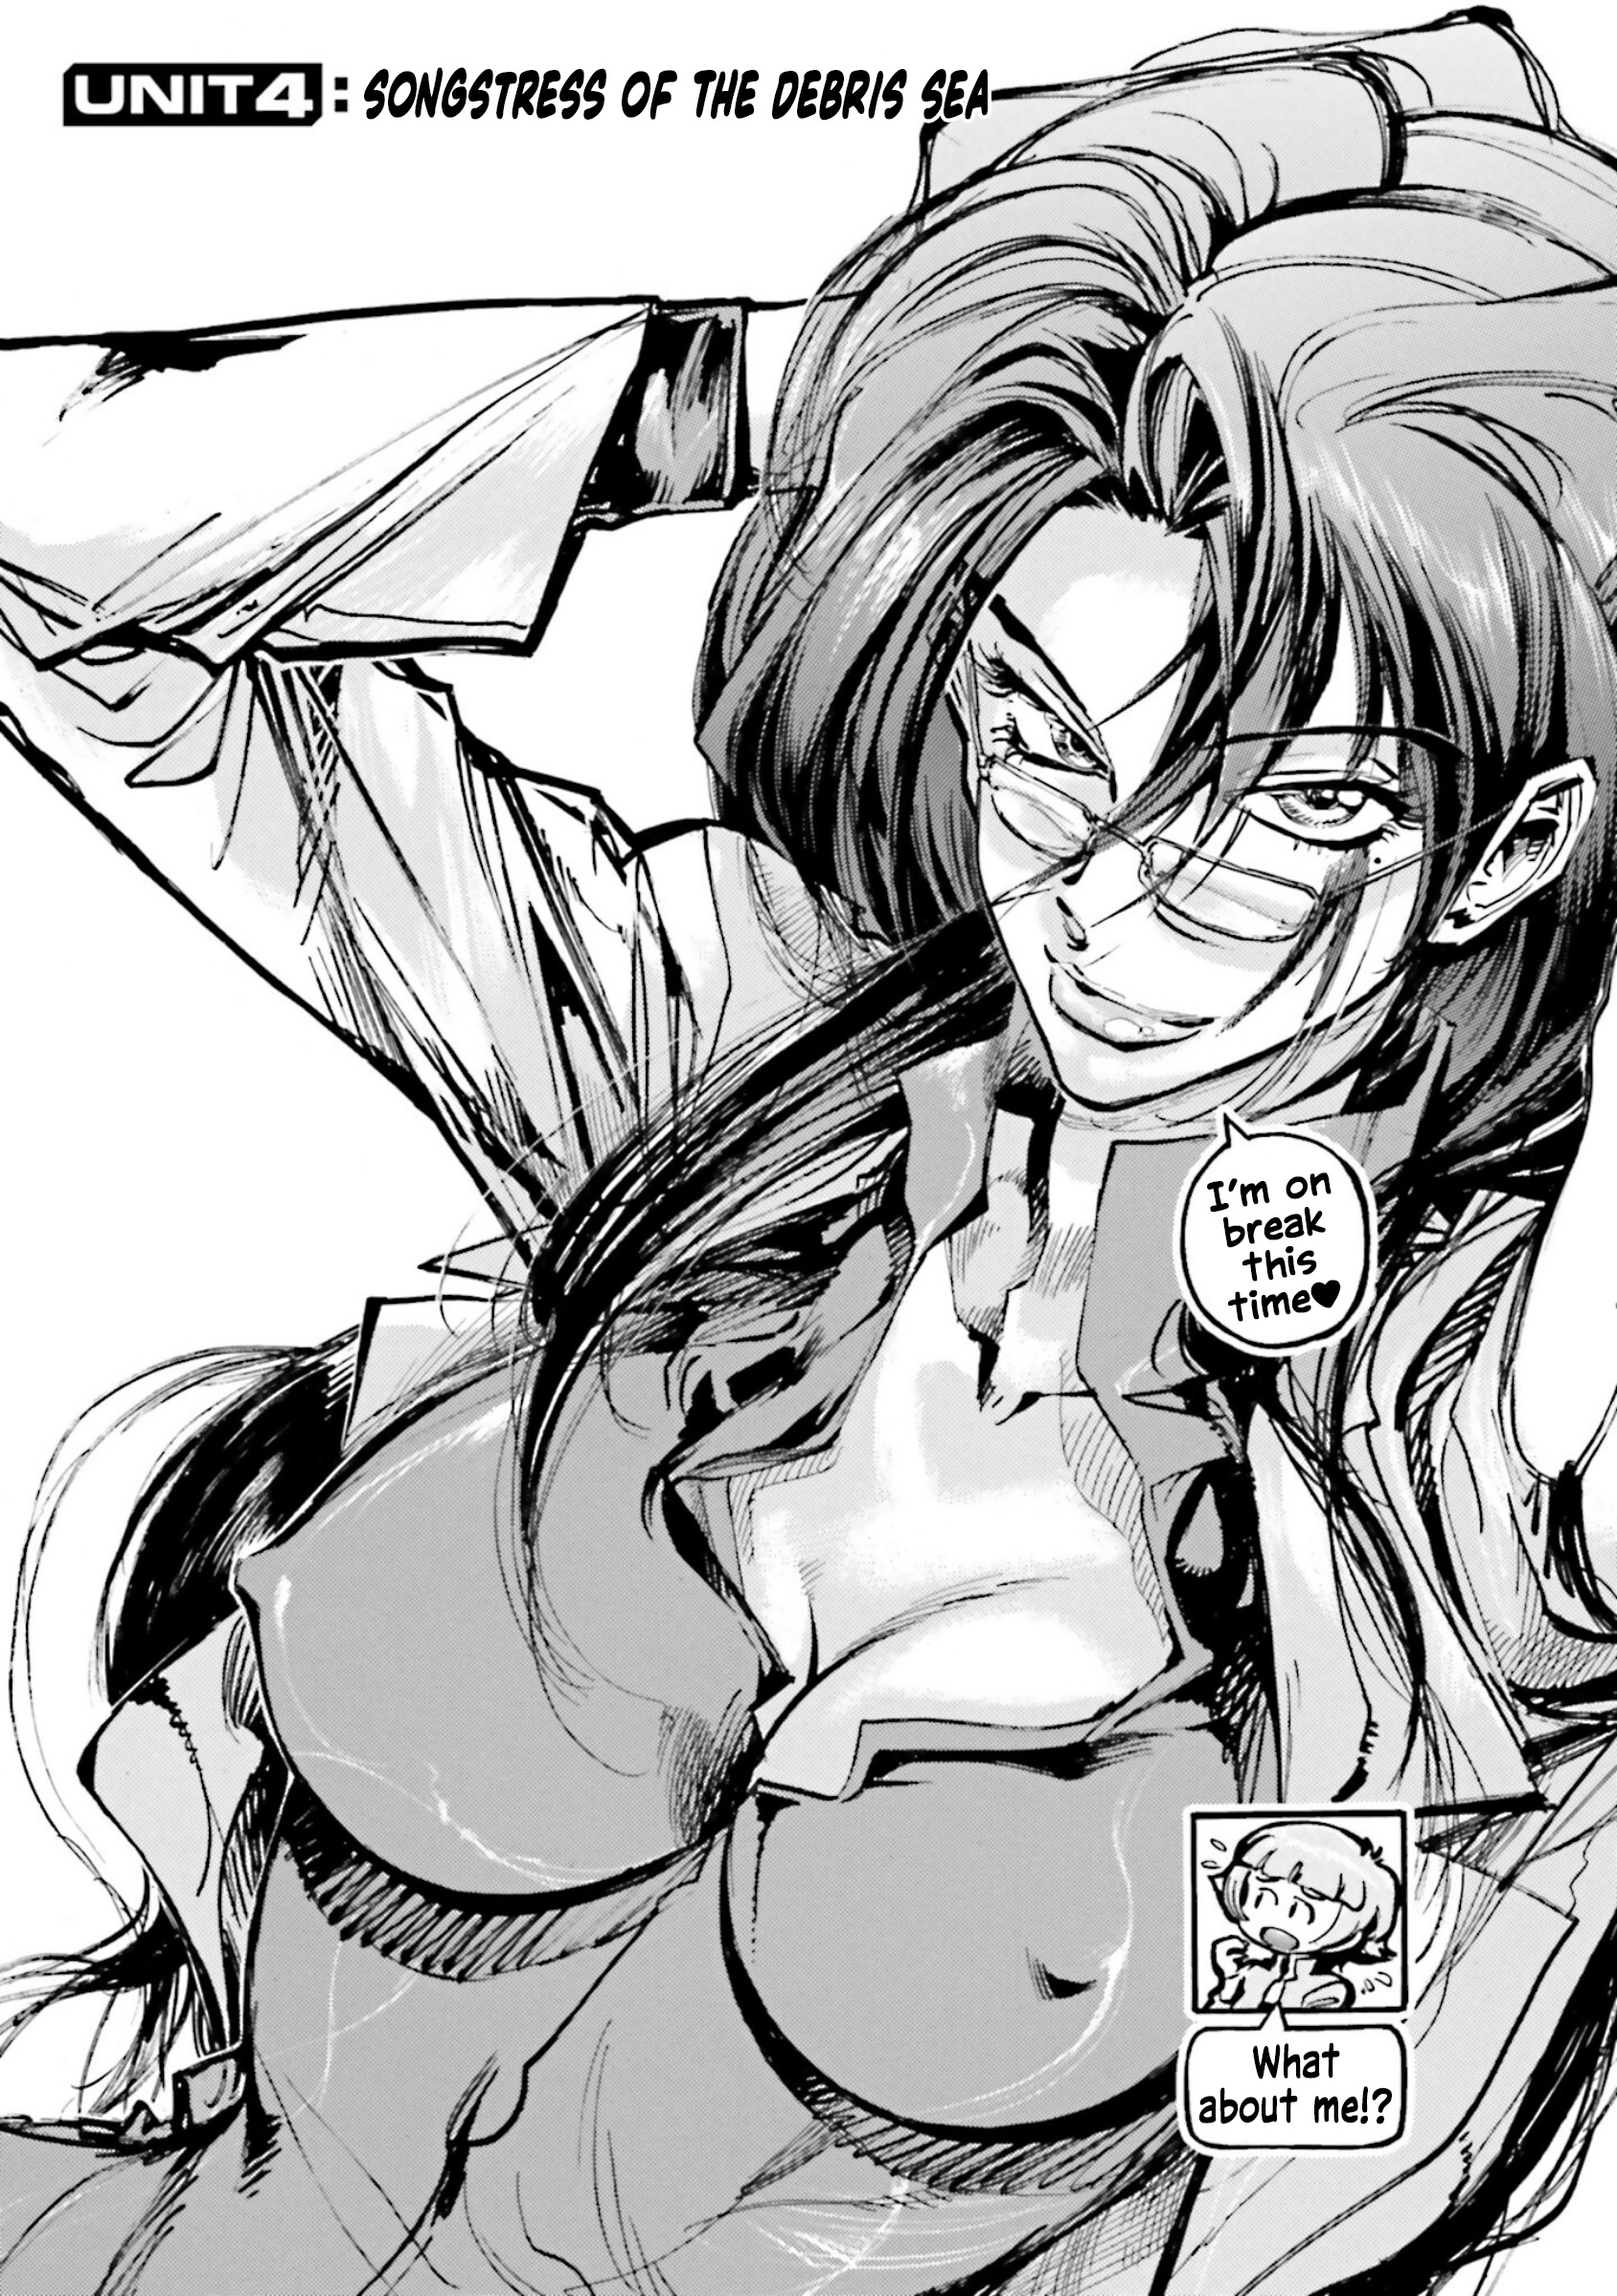 Mobile Suit Gundam Seed Astray R Vol.1 Chapter 4: Songstress Of The Debris Sea - Picture 1